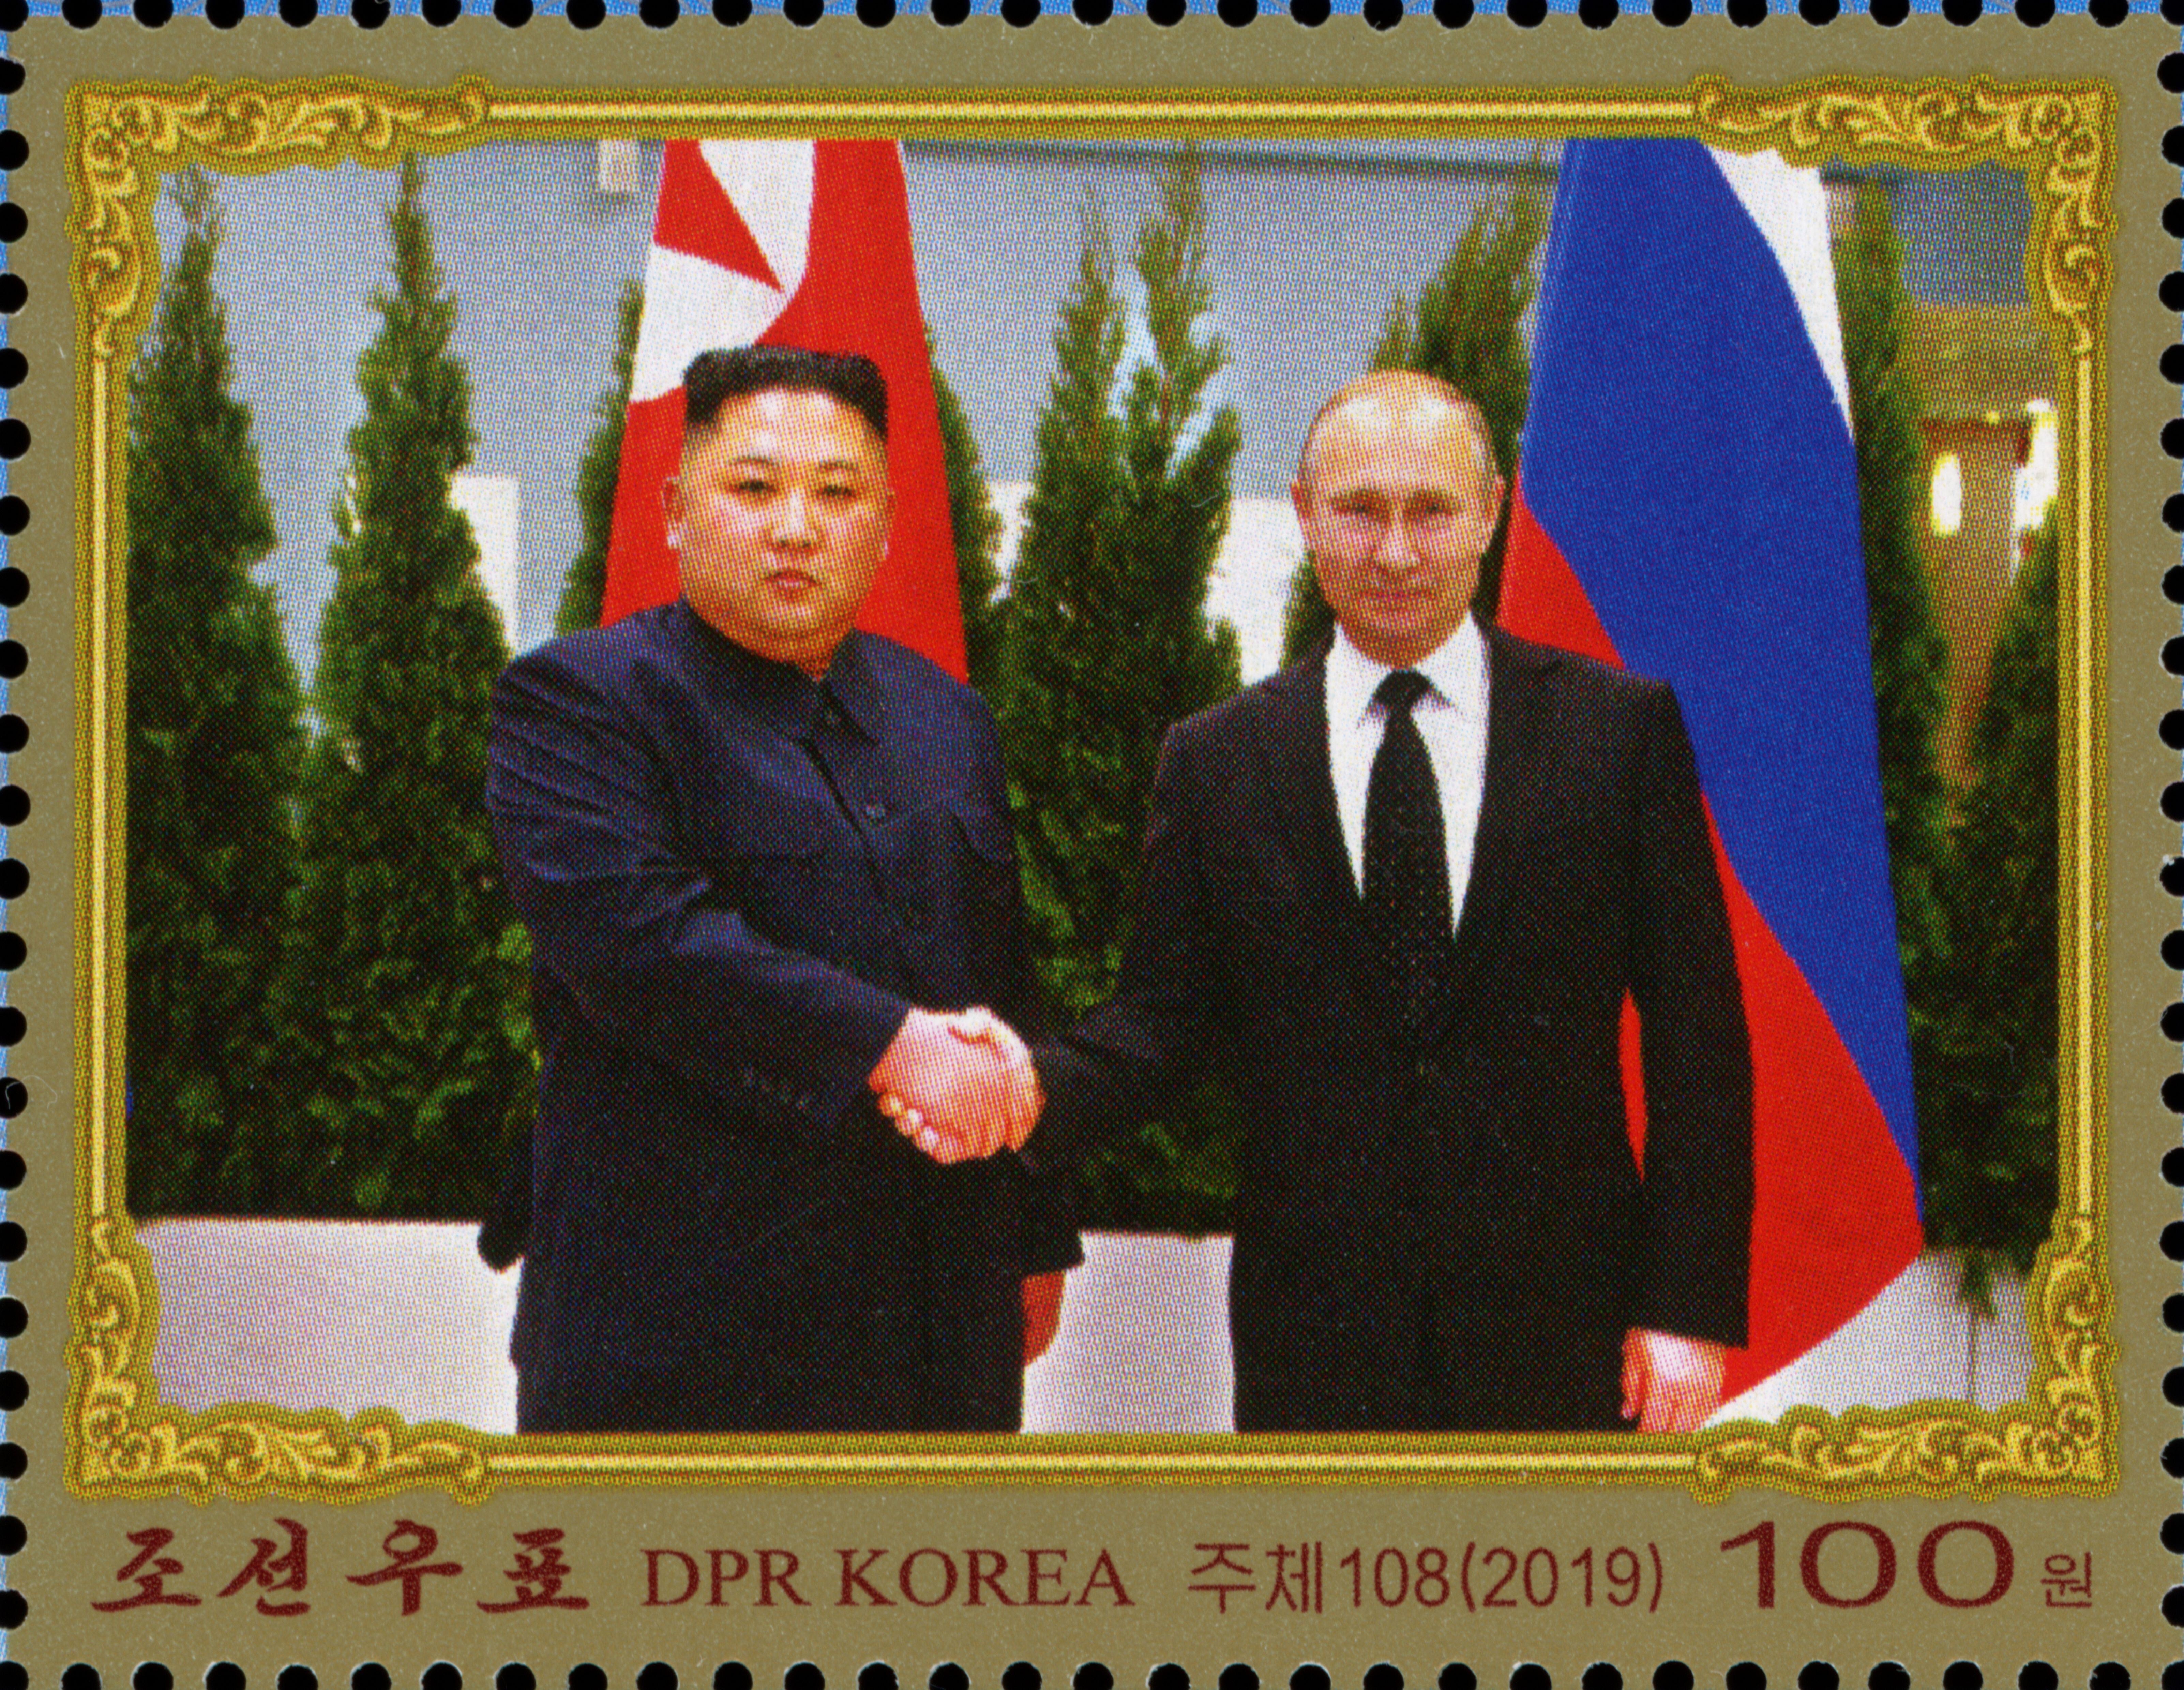 From Dark Reading – Lovers’ Spat? North Korea Backdoors Russian Foreign Affairs Ministry